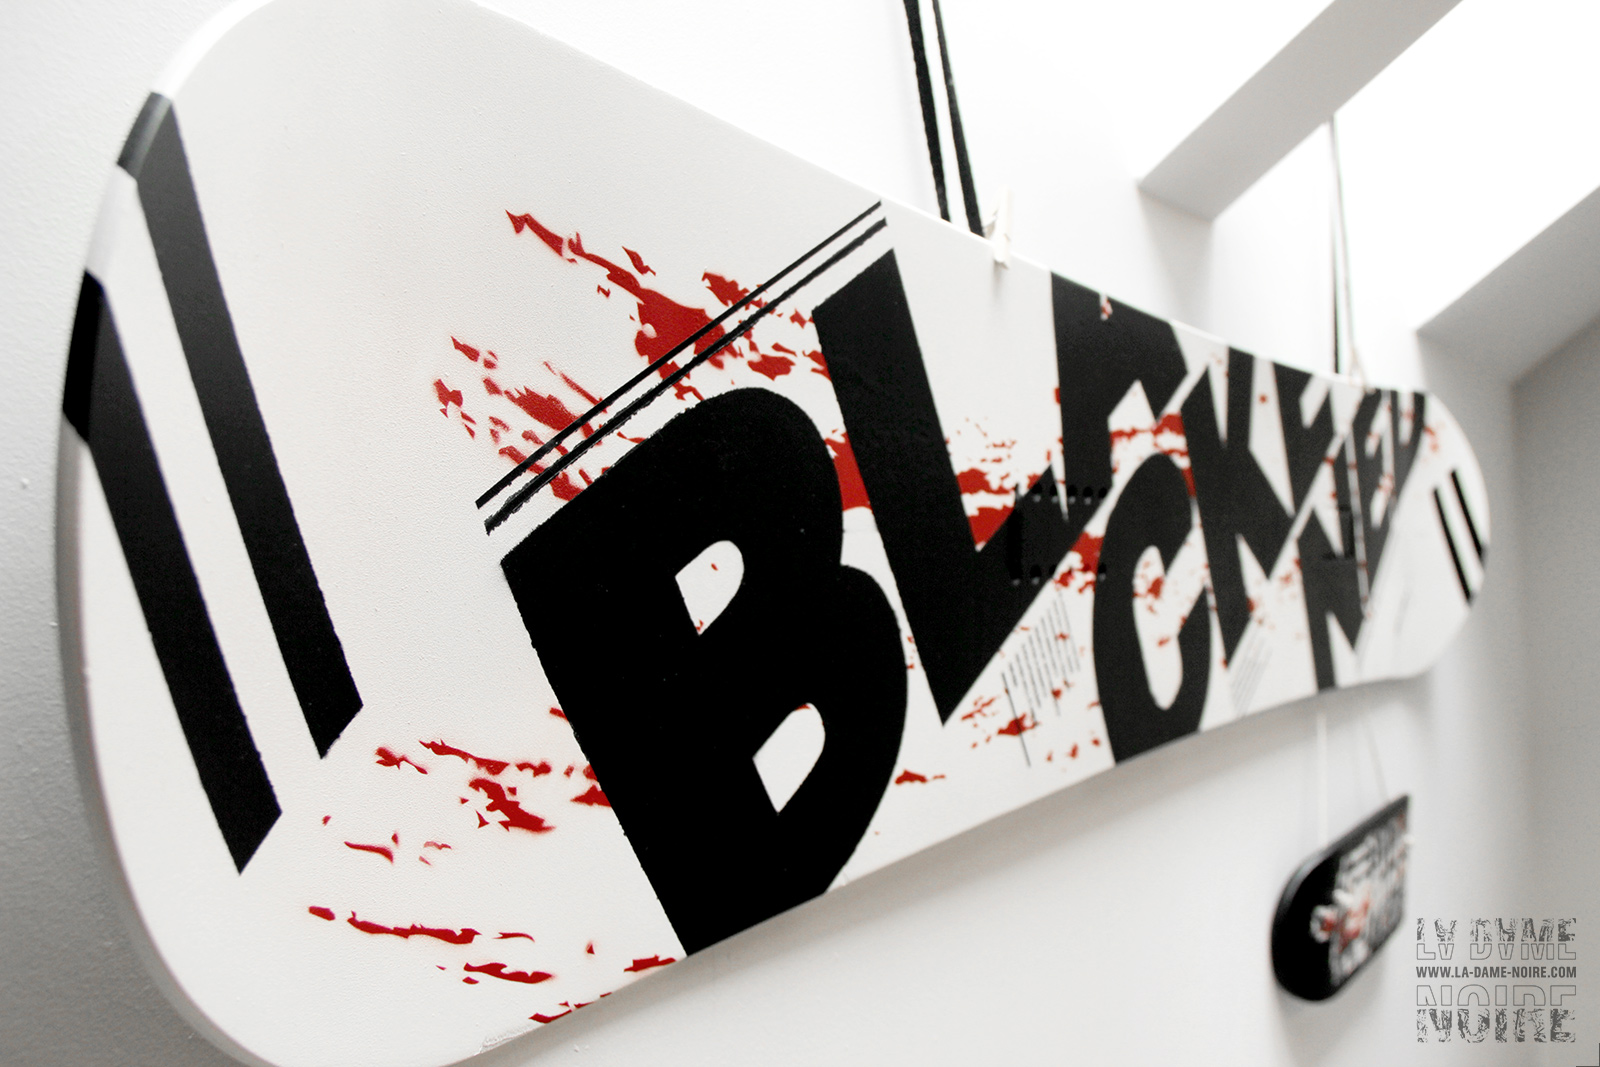 Details of the snowboard painted in black, white, red, and the word Blackened in big bold letters